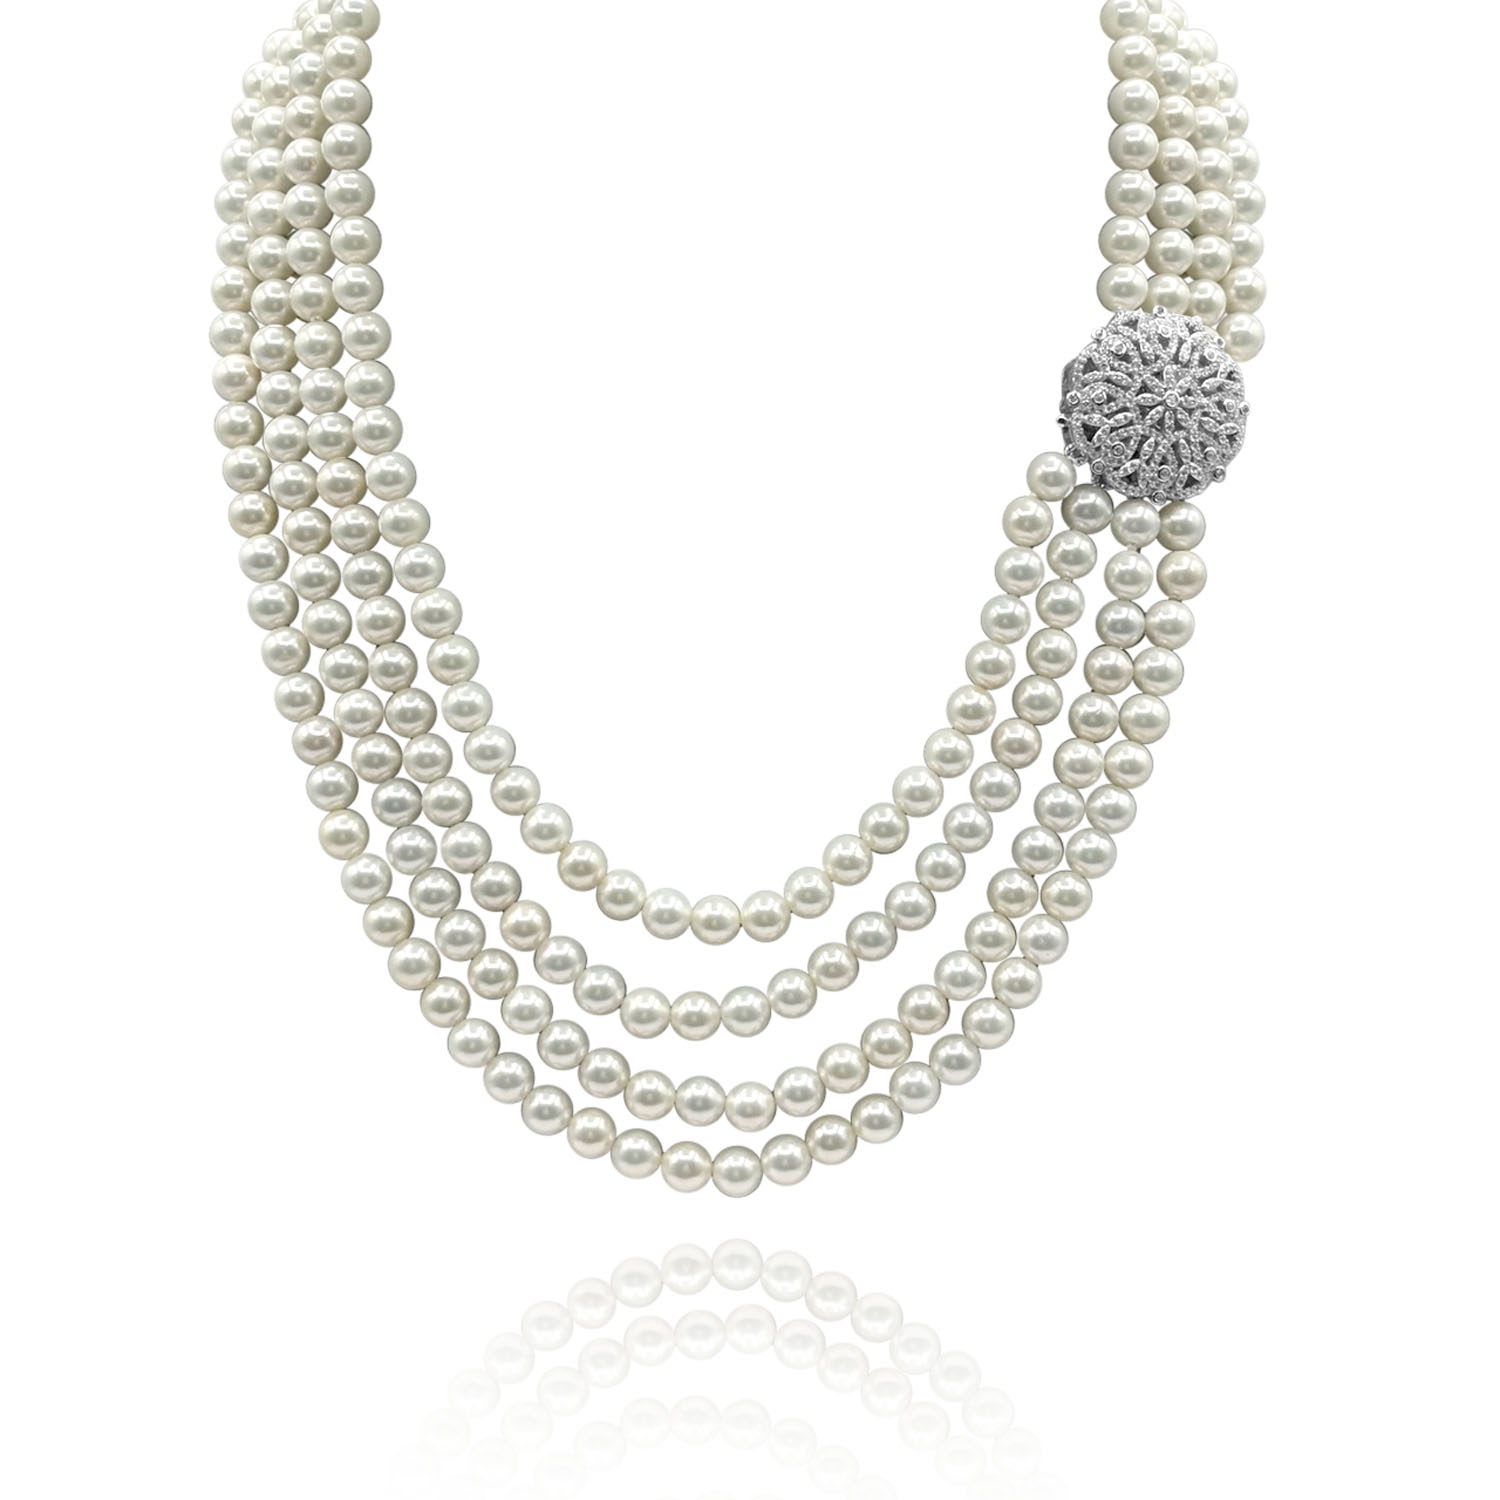 Michael Nash Jewelry Women's Neutrals Four Strand Shell Pearl Nesting Necklace - Sterling Silver & Cubic Zirconium Clasp In Gray